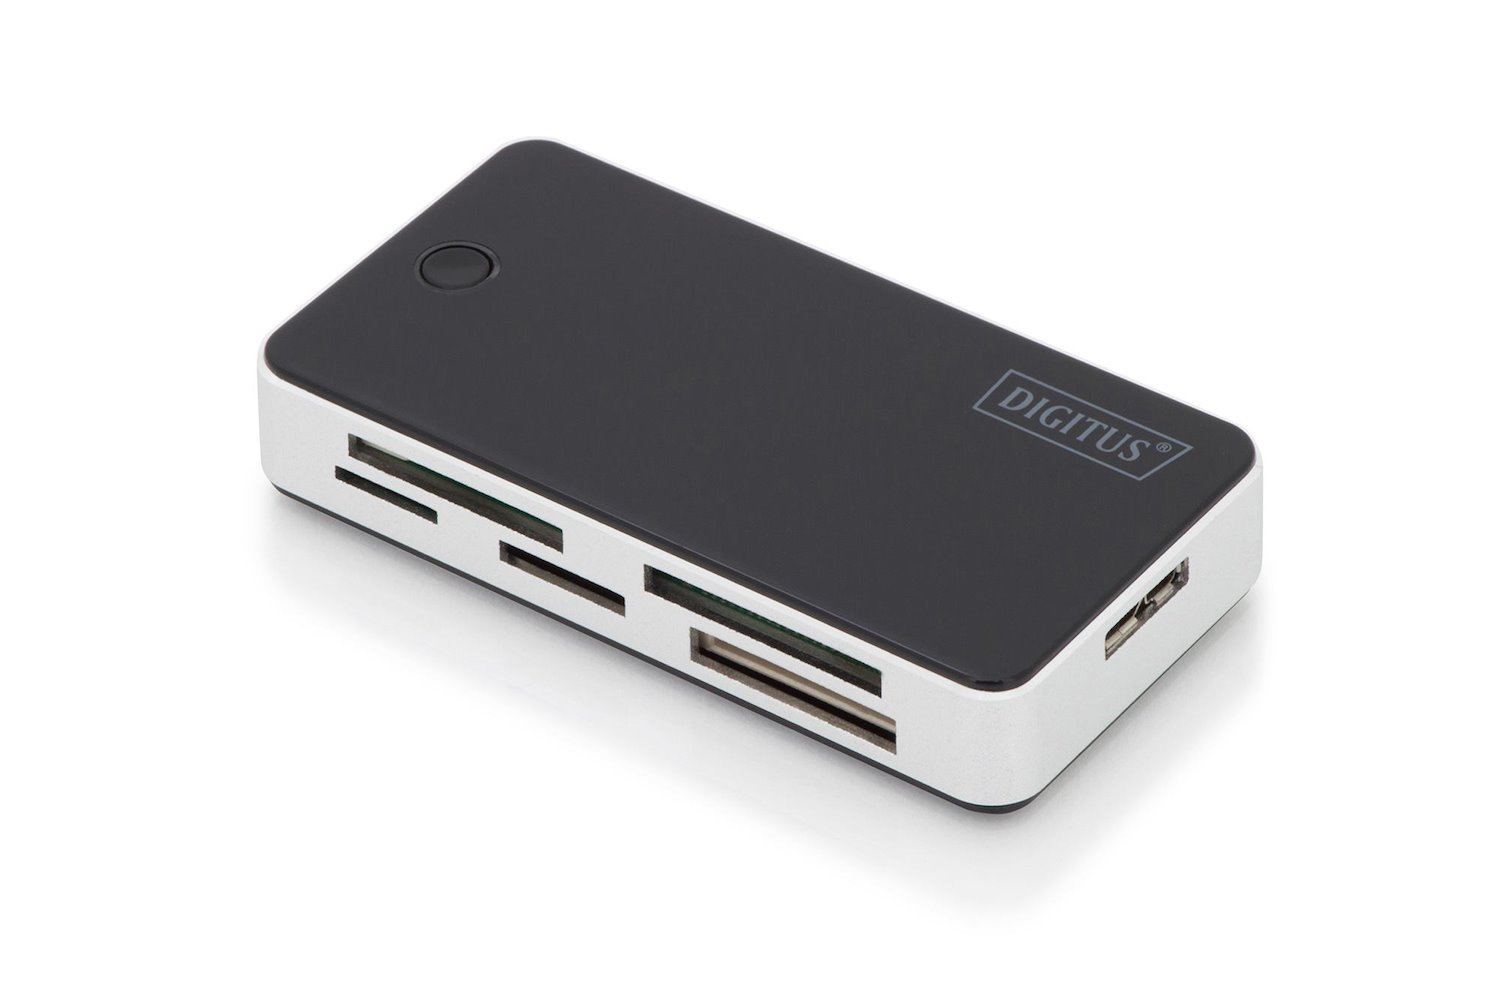 Digitus Card Reader All-In-One Usb 3.0 (Usb 3.0 Card Reader With 1M - Usb A Connection Cable - Support MS/SD/SDHC/MiniSD/M2/CF/MD/SDXC Cards Gängige Karten - Warranty: 24M)